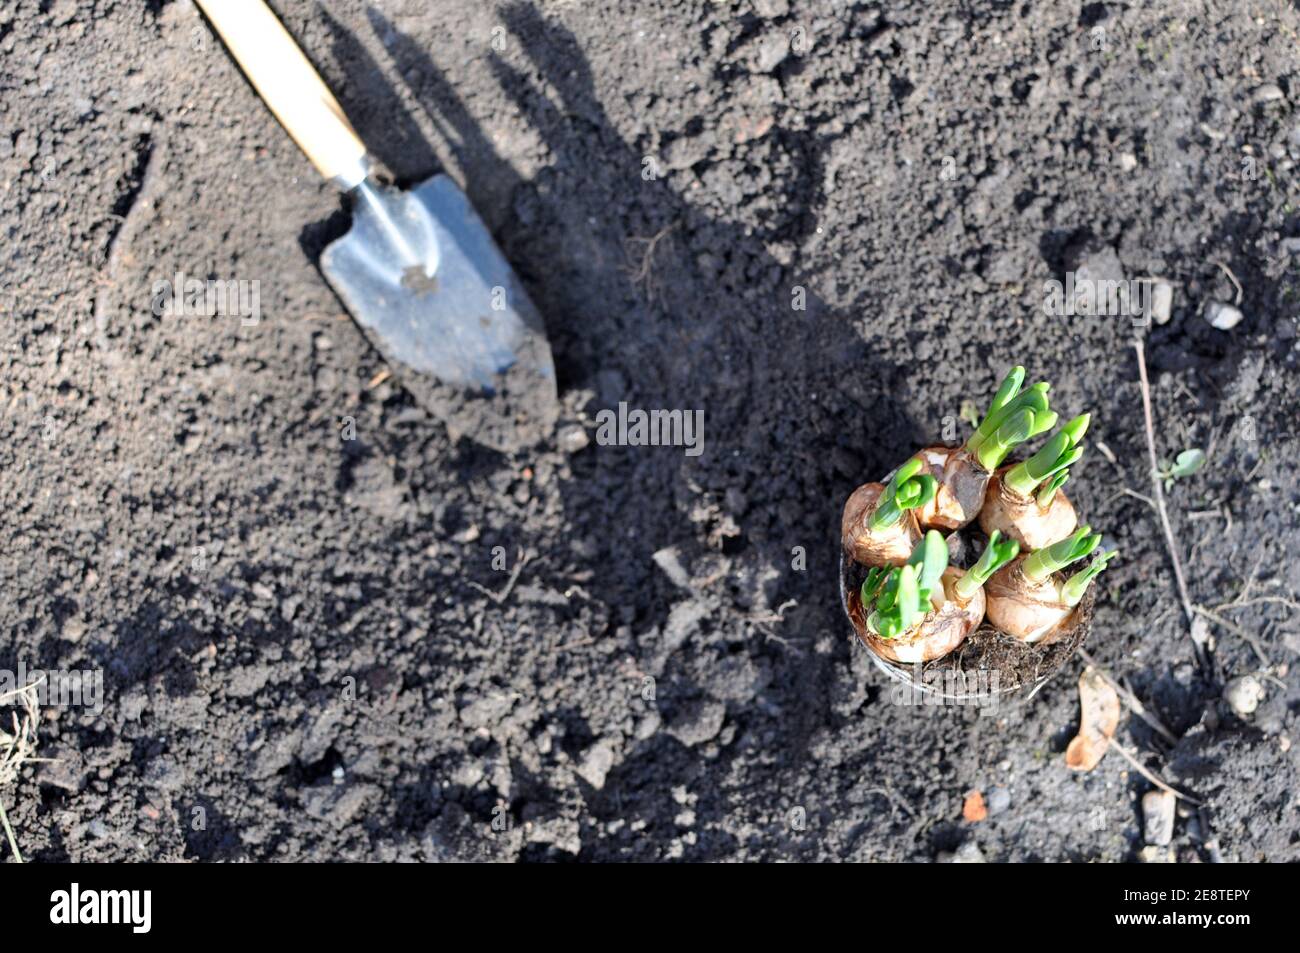 Top view of a gardening tool near plant bulbs in the garden. Stock Photo